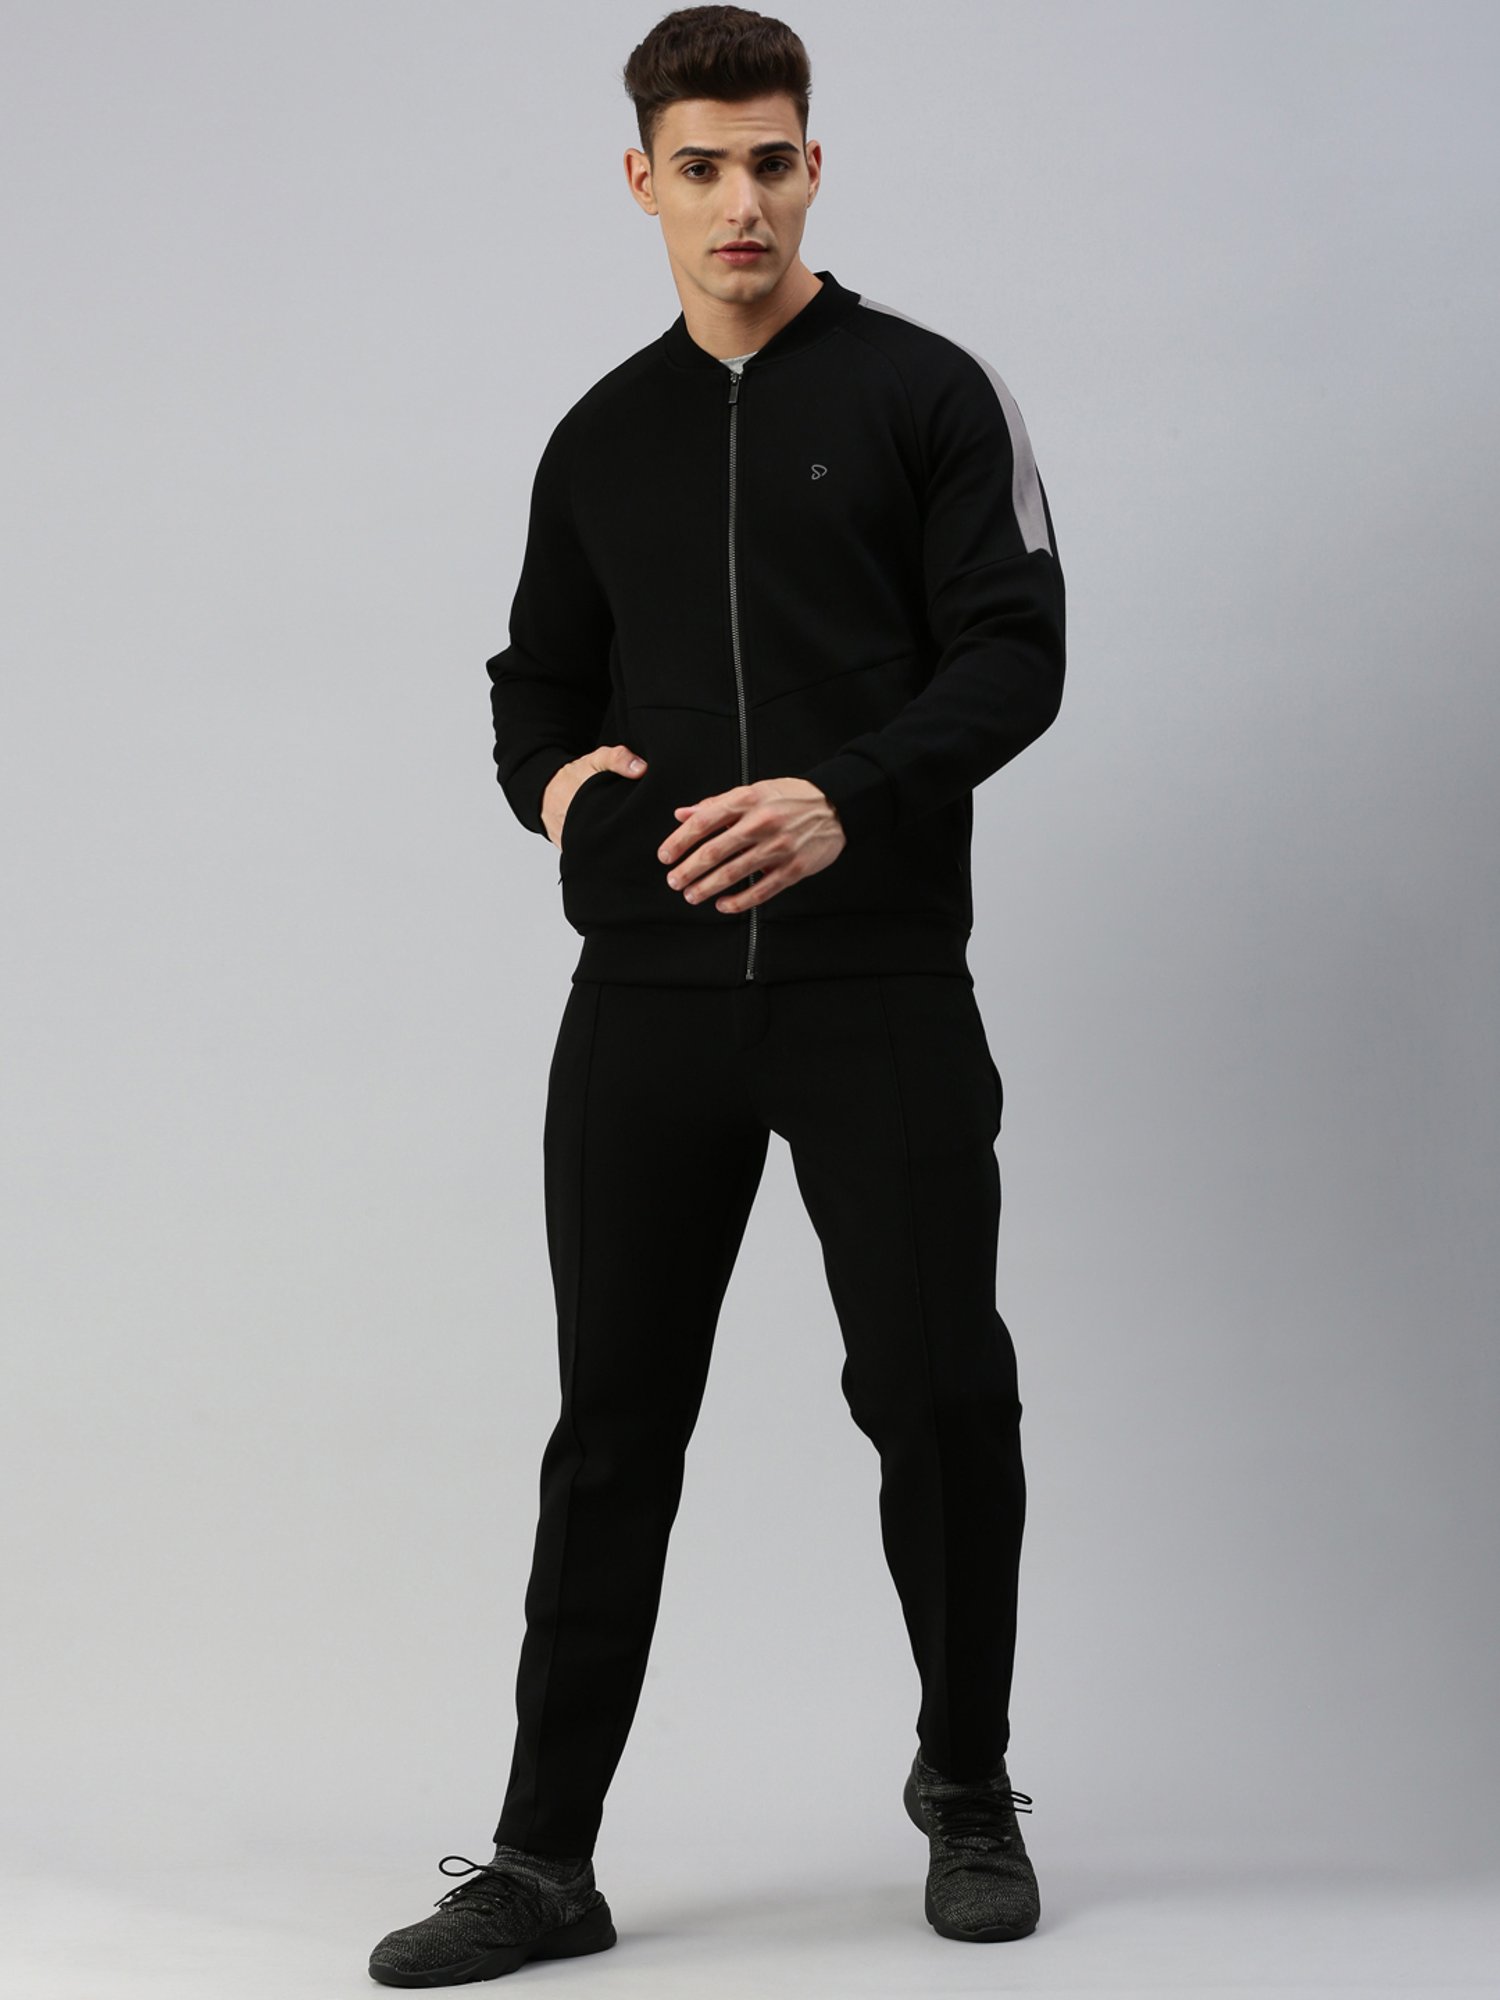 How to Style Men's Track Pants? – Sporto by Macho